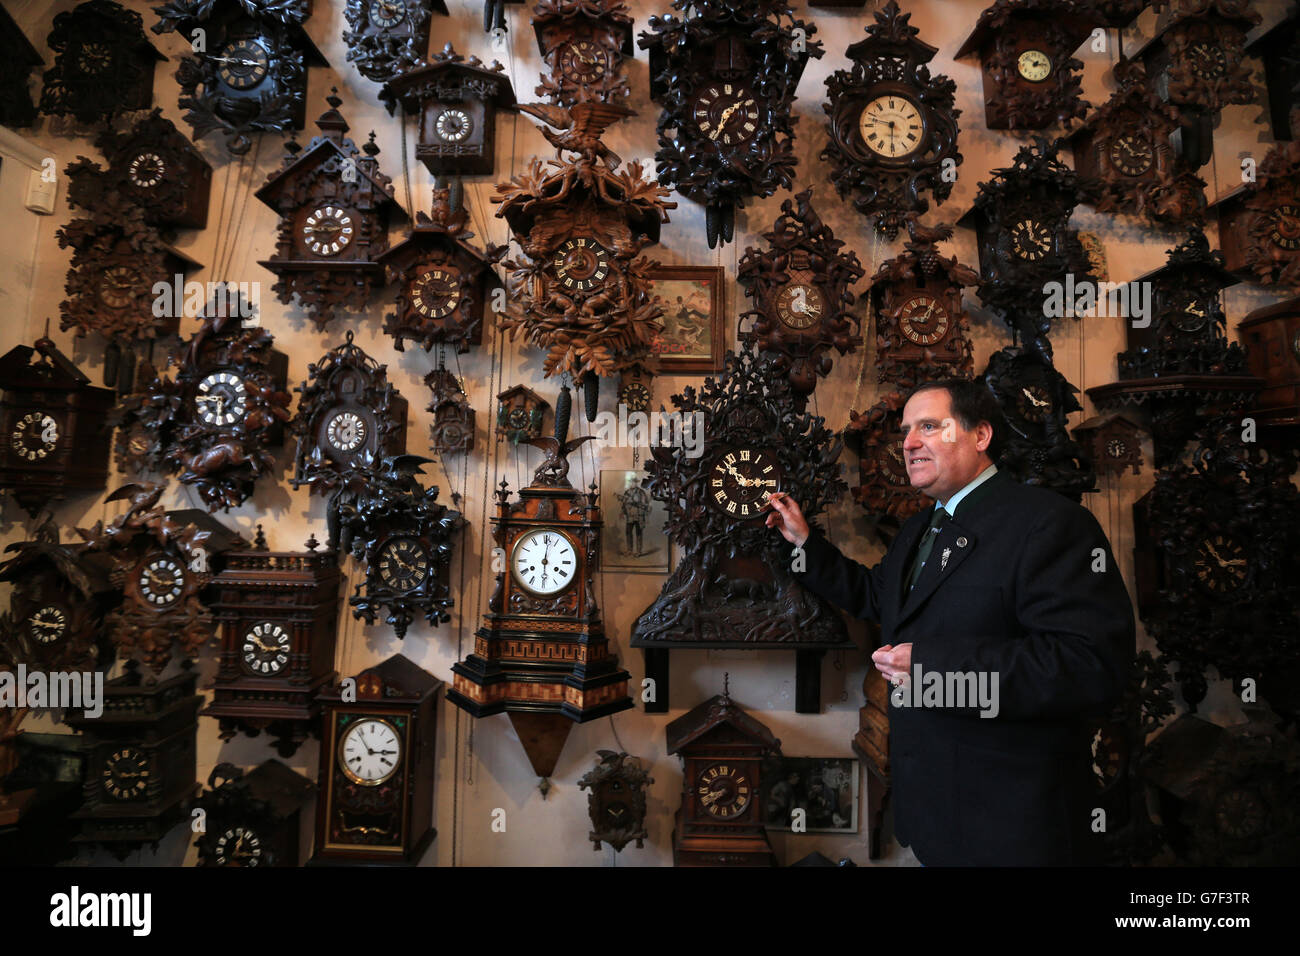 Horologist Roman Piekarski starts the time consuming task of adjusting the antique clocks at Cuckooland Museum in Tabley, as he prepares for the clocks to go back an hour on Sunday morning, at the end of British Summer Time. Stock Photo